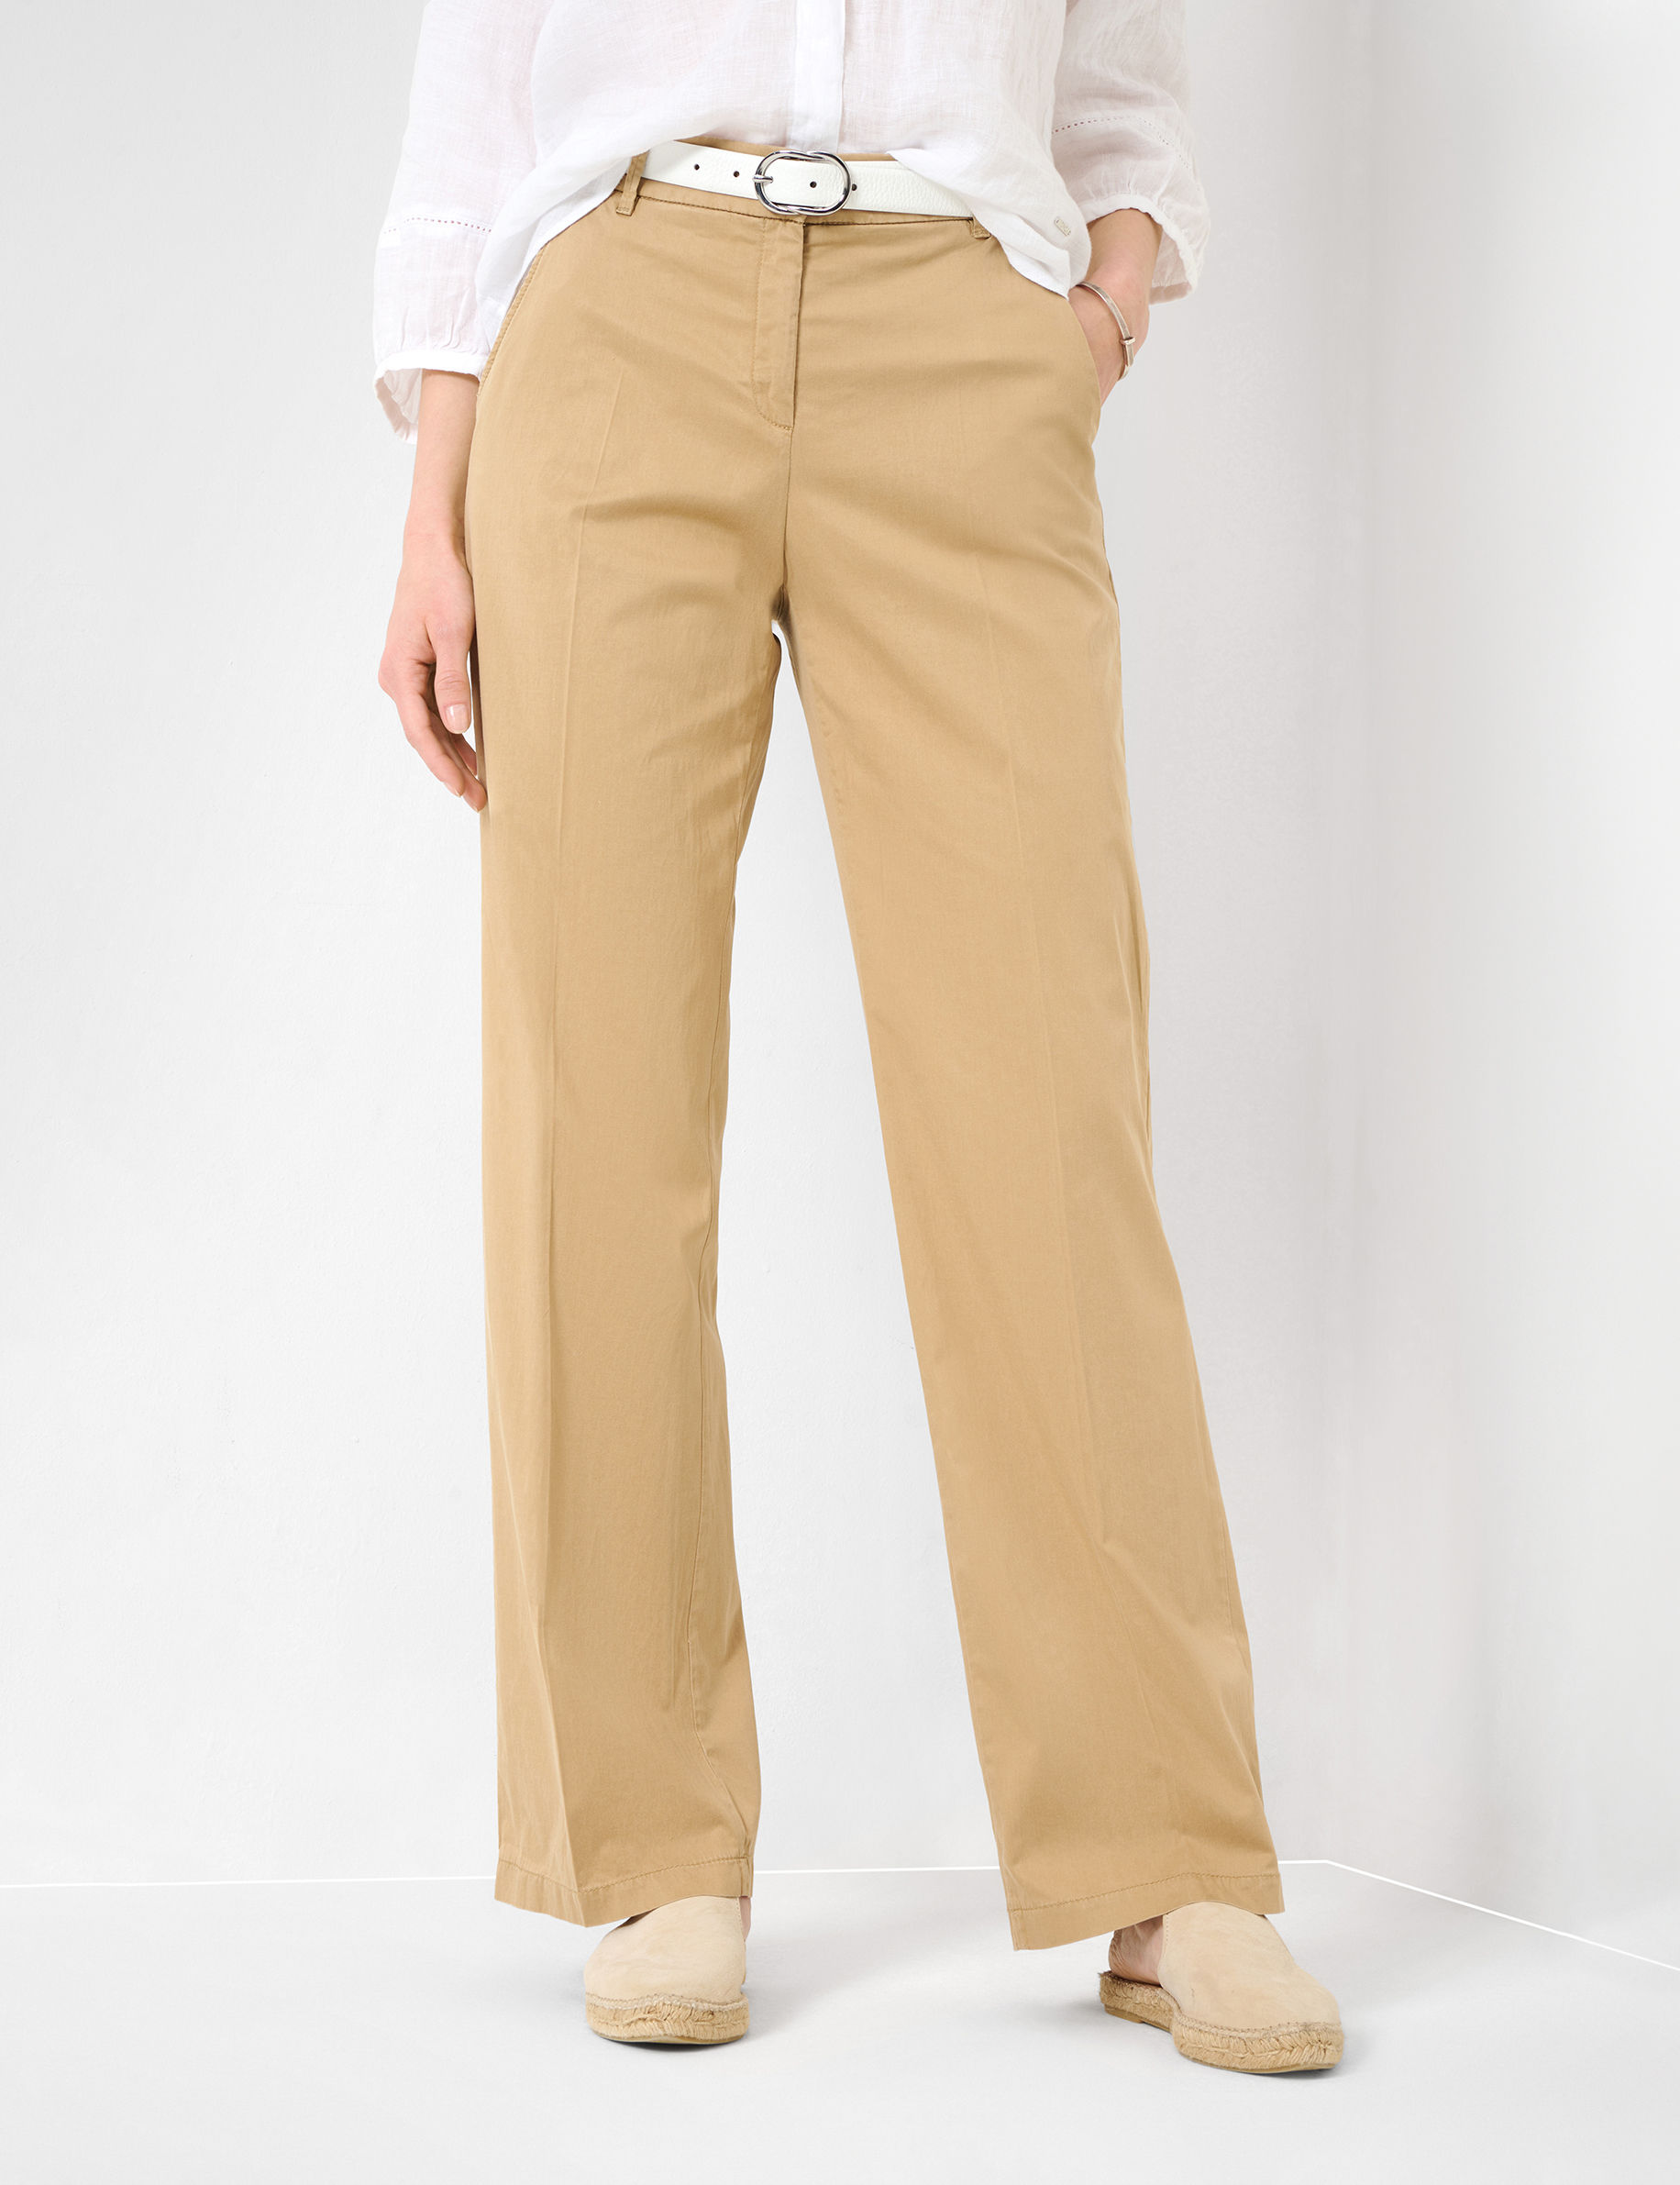 Shades of brown, Women, WIDE LEG, Style MAINE, MODEL_FRONT_ISHOP